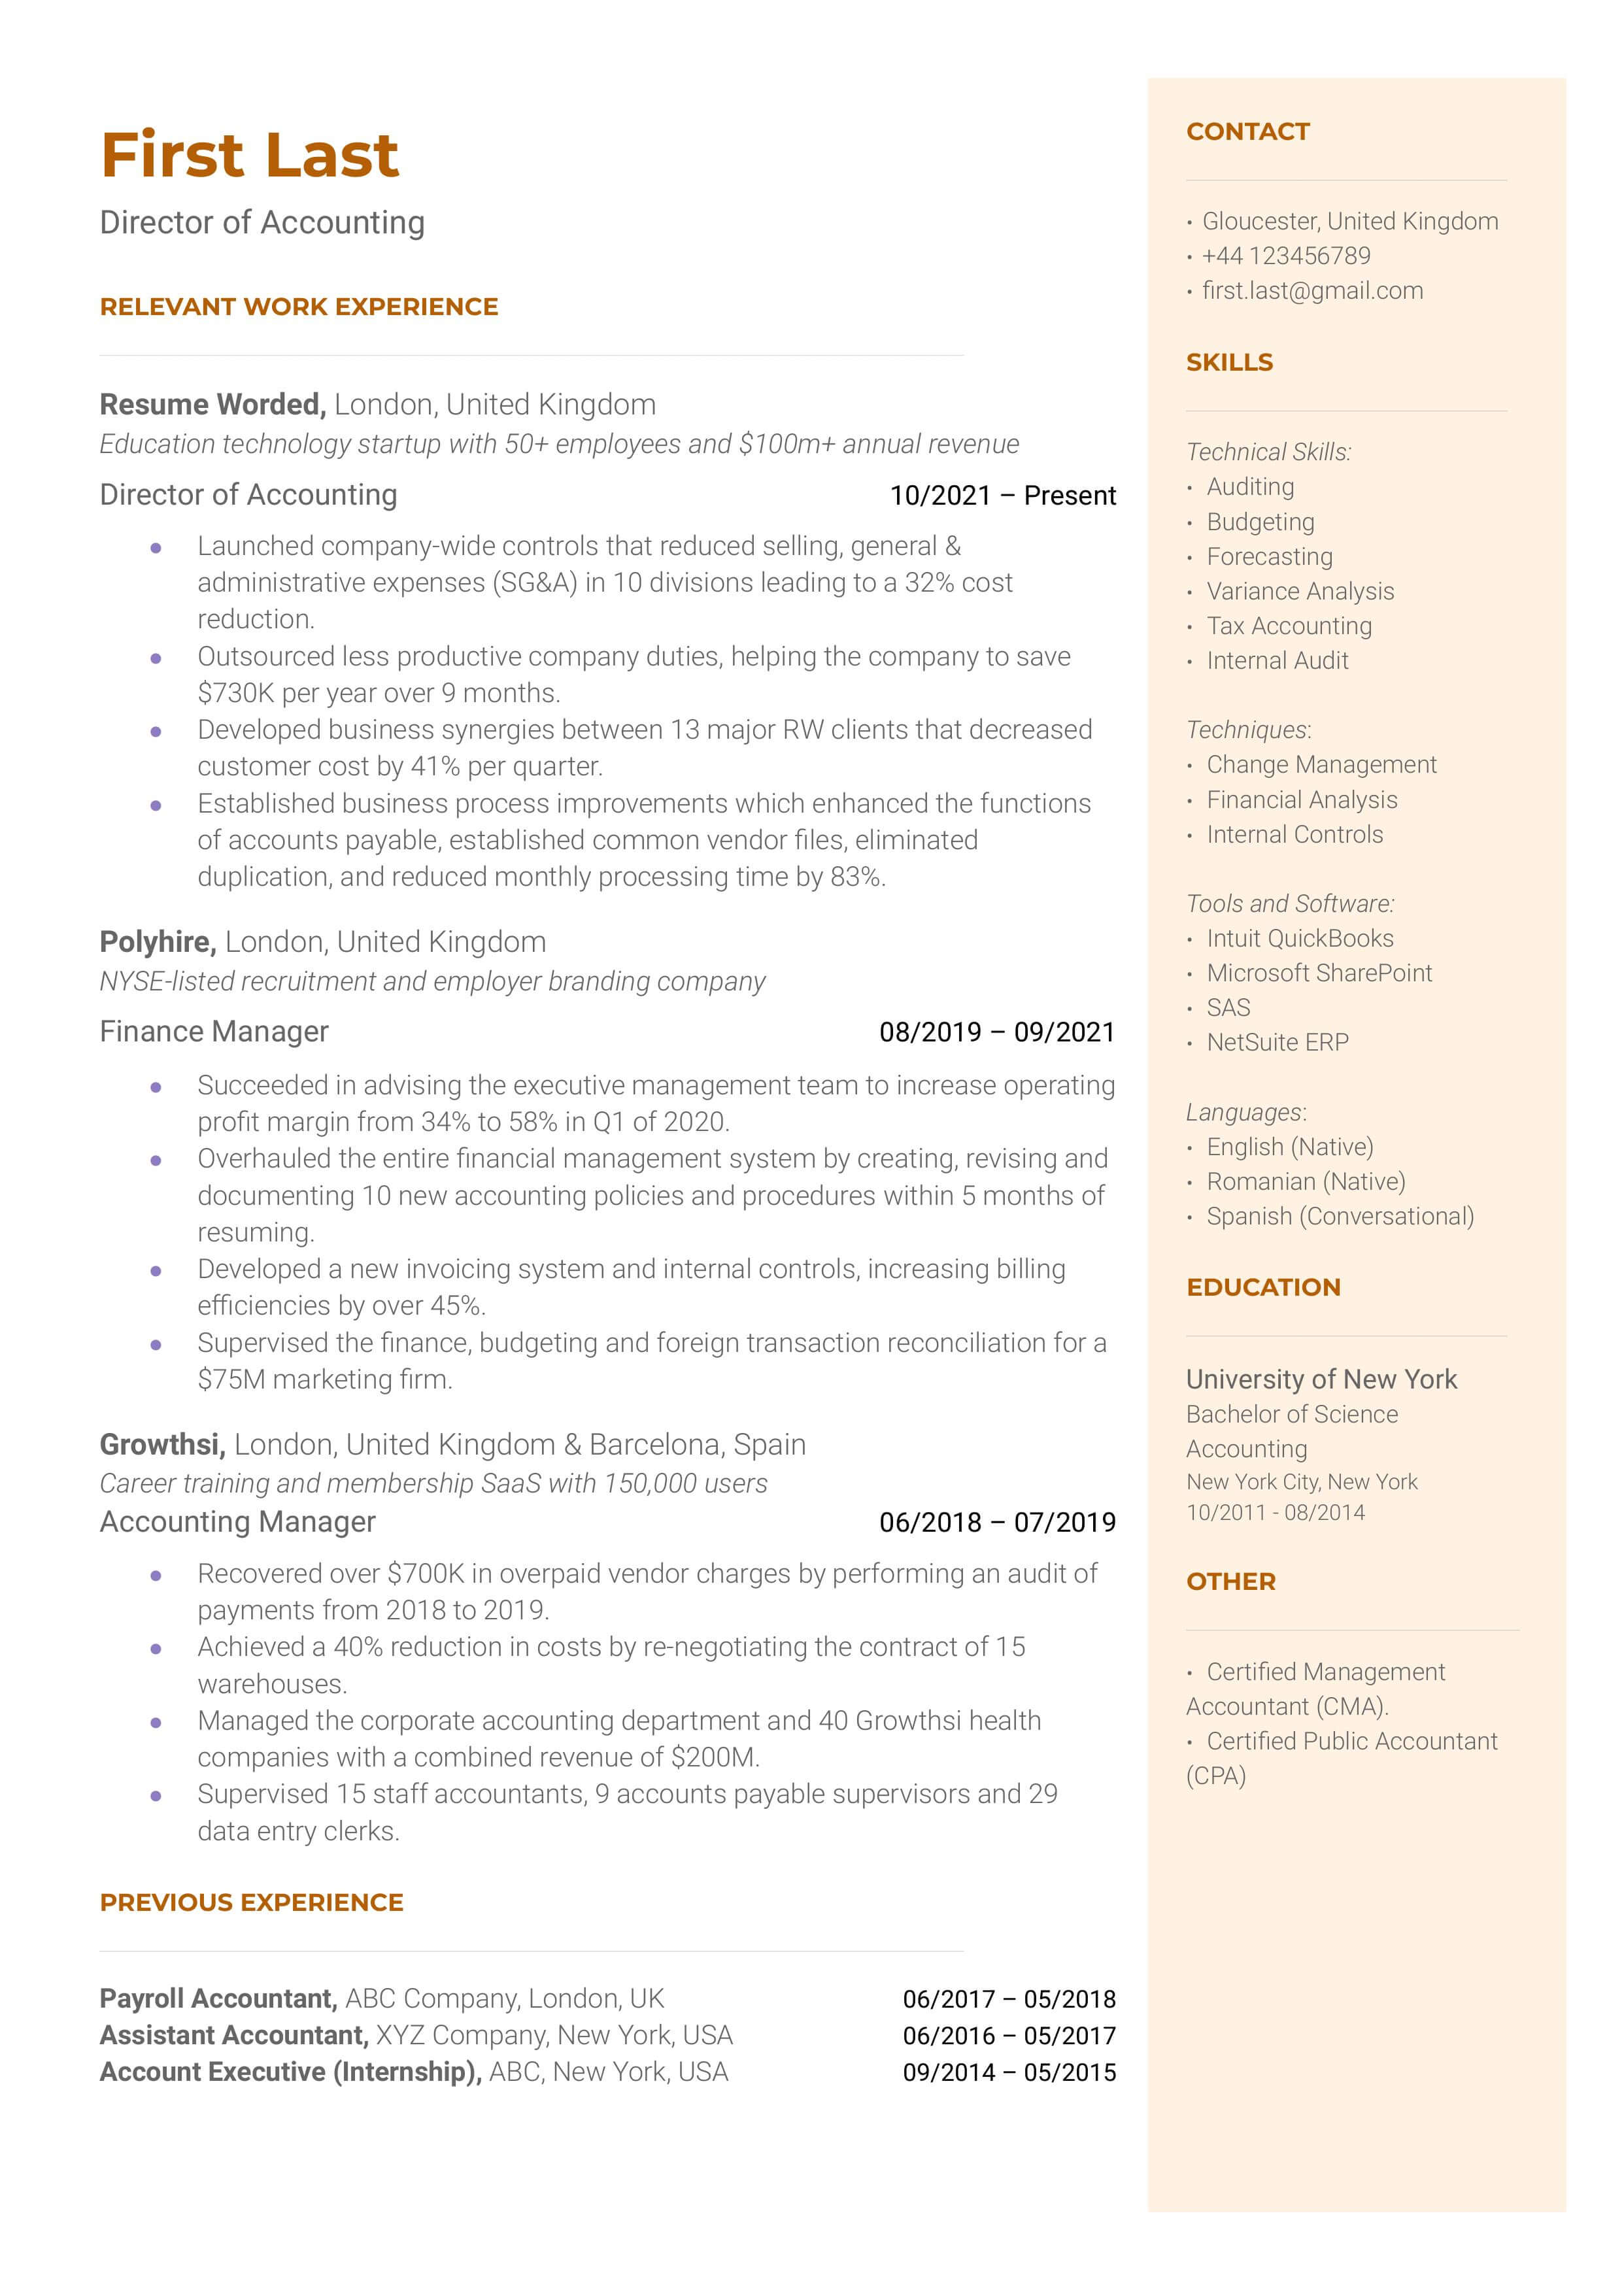 A resume for a director of accounting with a BS in accounting, CMA and CPA license, and experience as a finance manager.